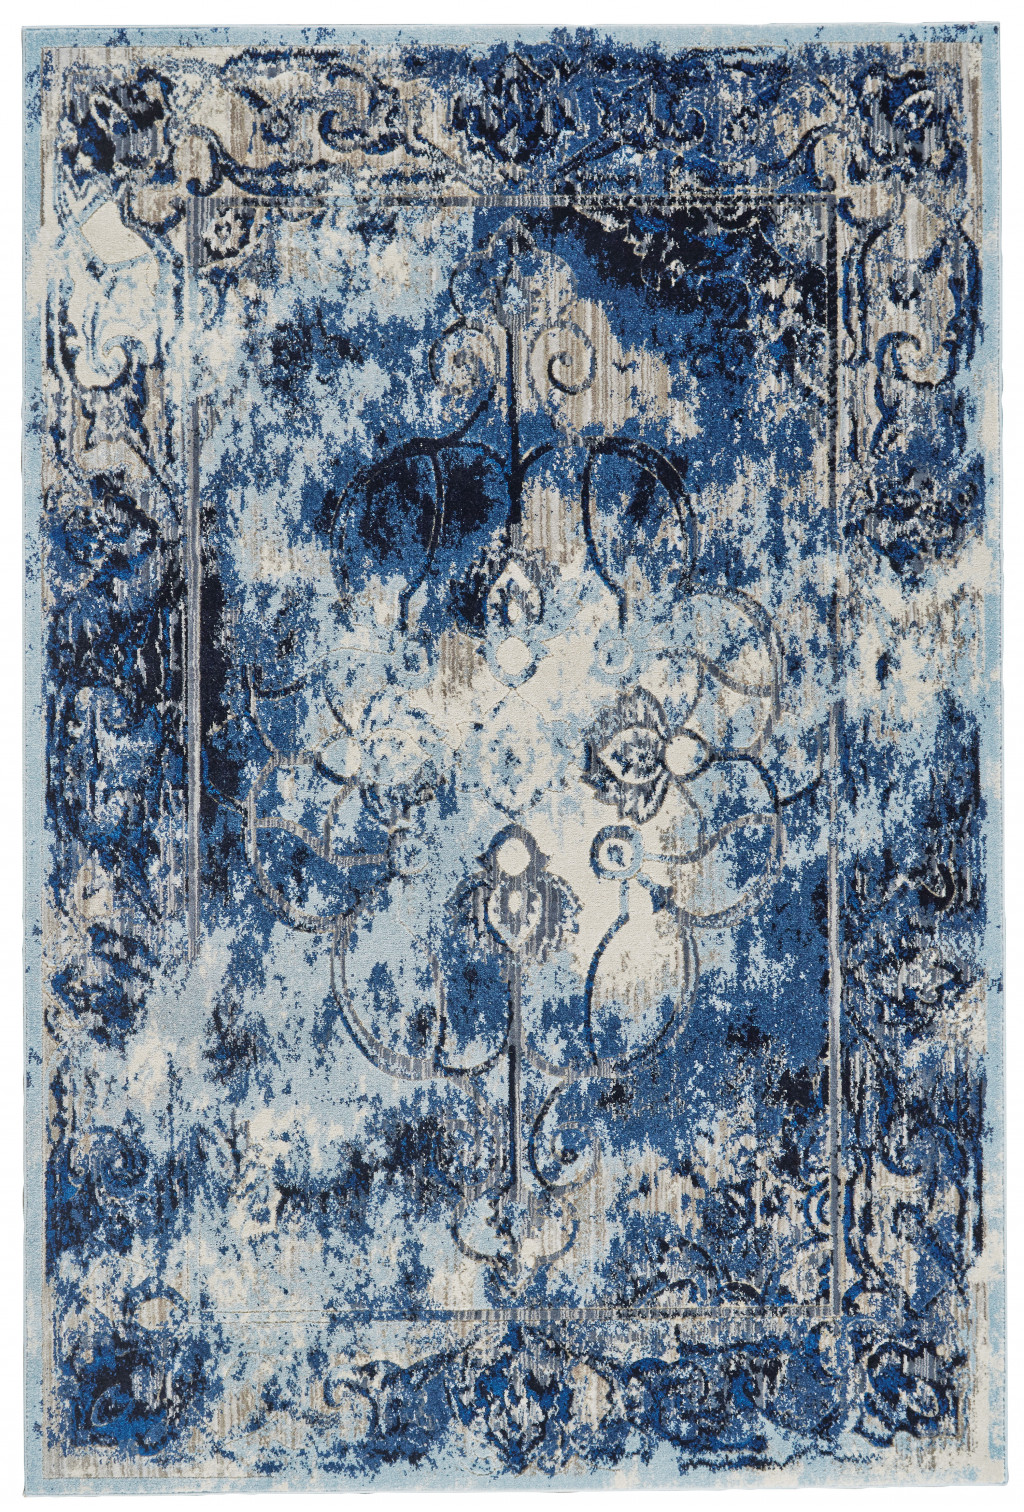 5' X 8' Blue Ivory And Gray Floral Distressed Stain Resistant Area Rug-511243-1